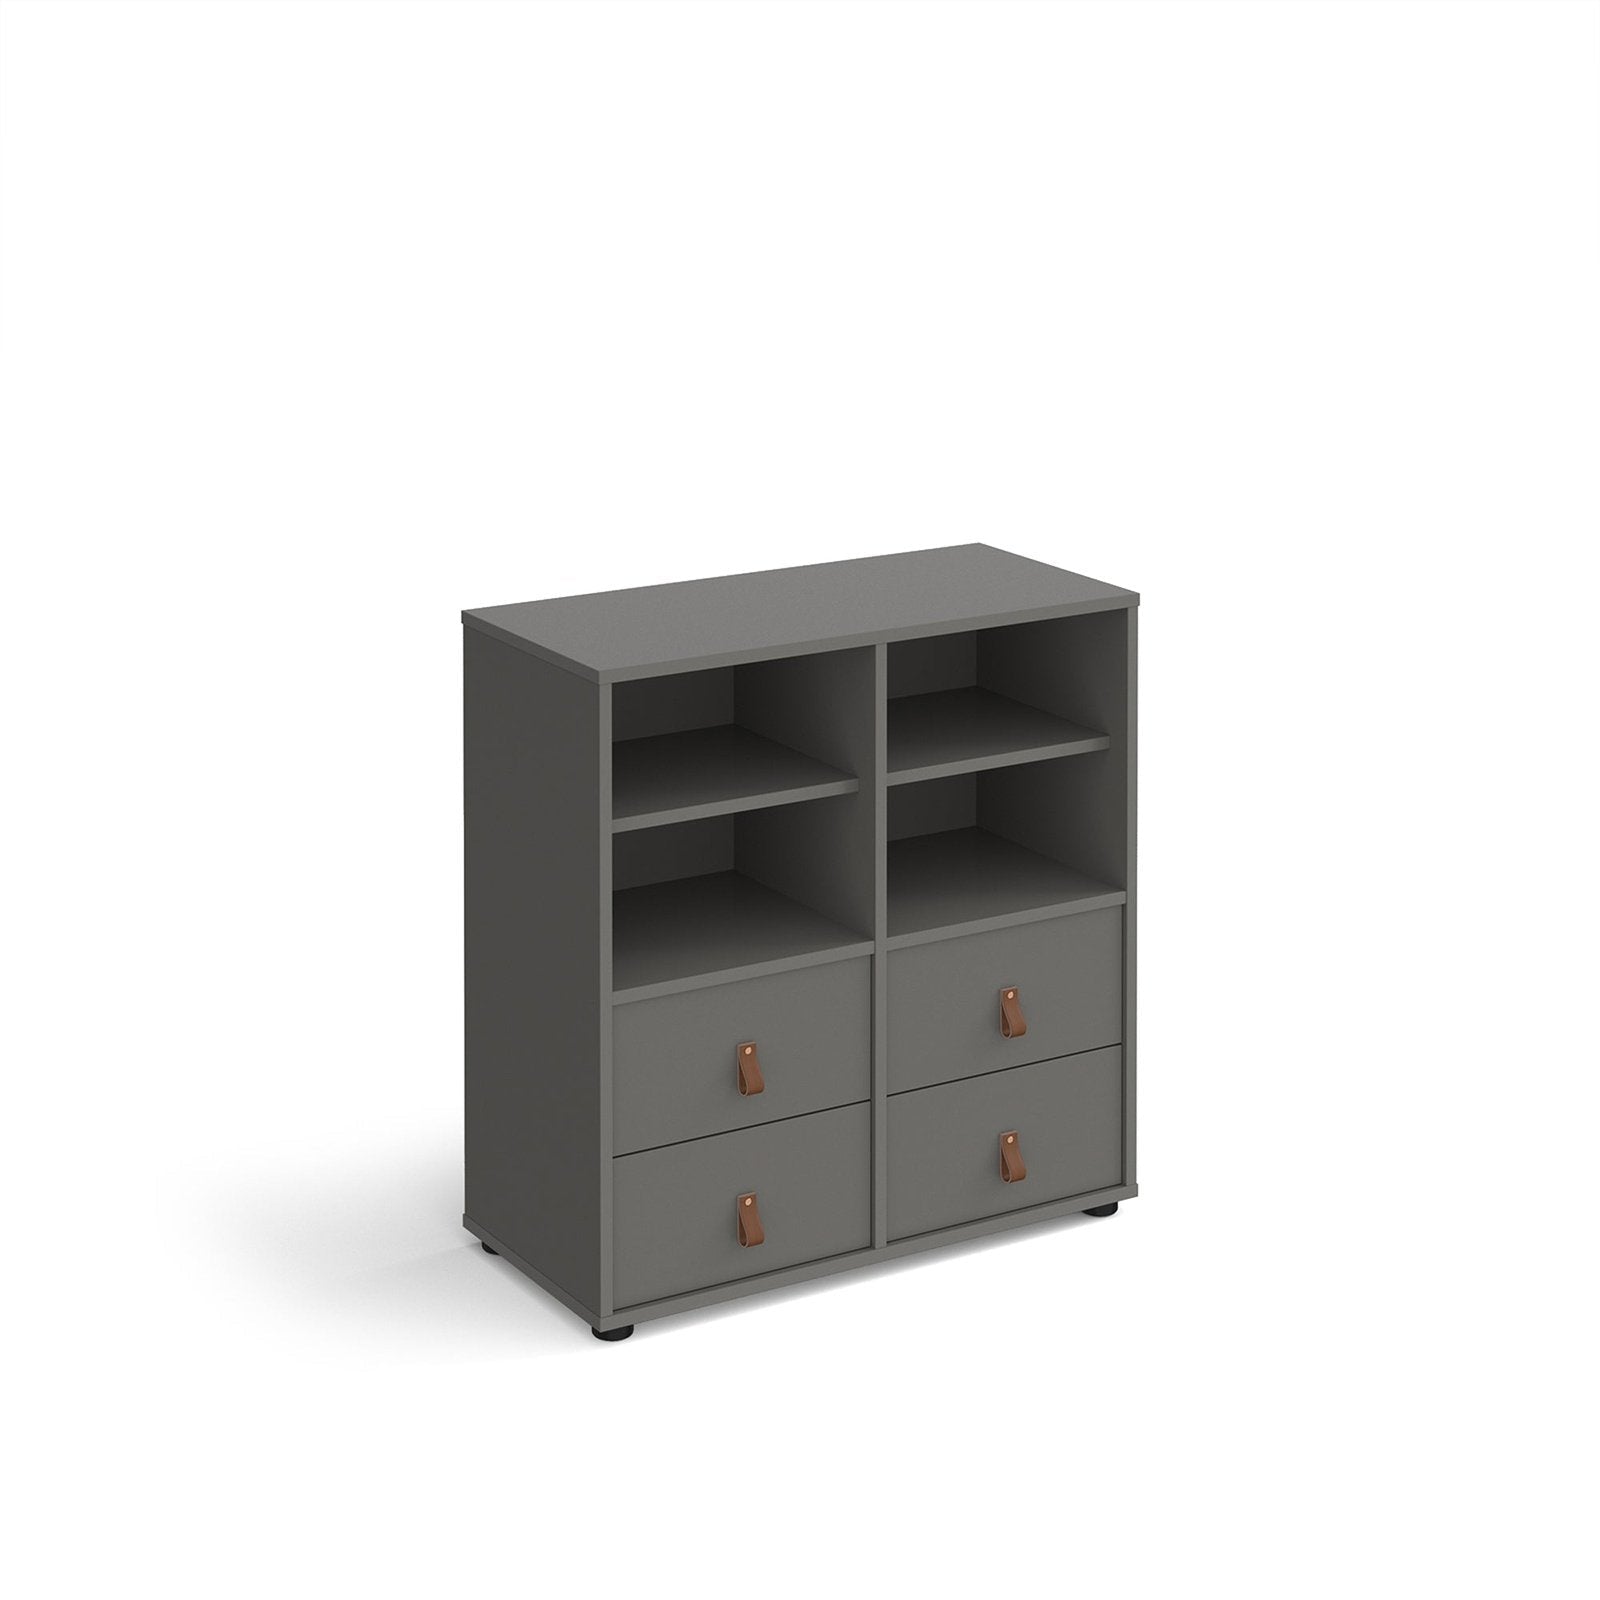 Universal cube storage unit 875mm high on glides with matching shelves and 2 sets of drawers - Office Products Online